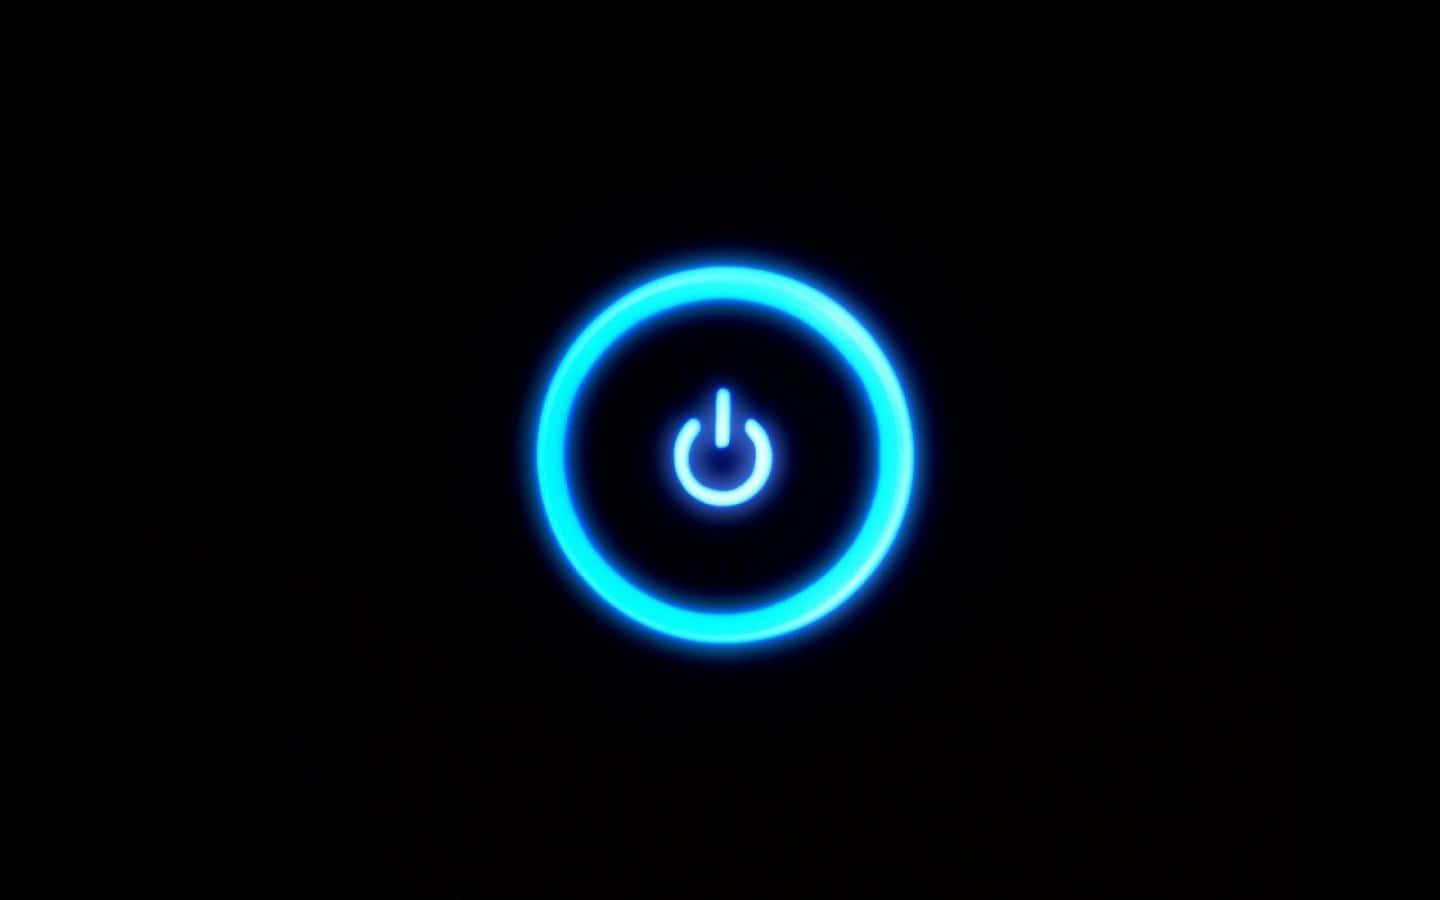 A Blue Light Is Shown On A Black Background